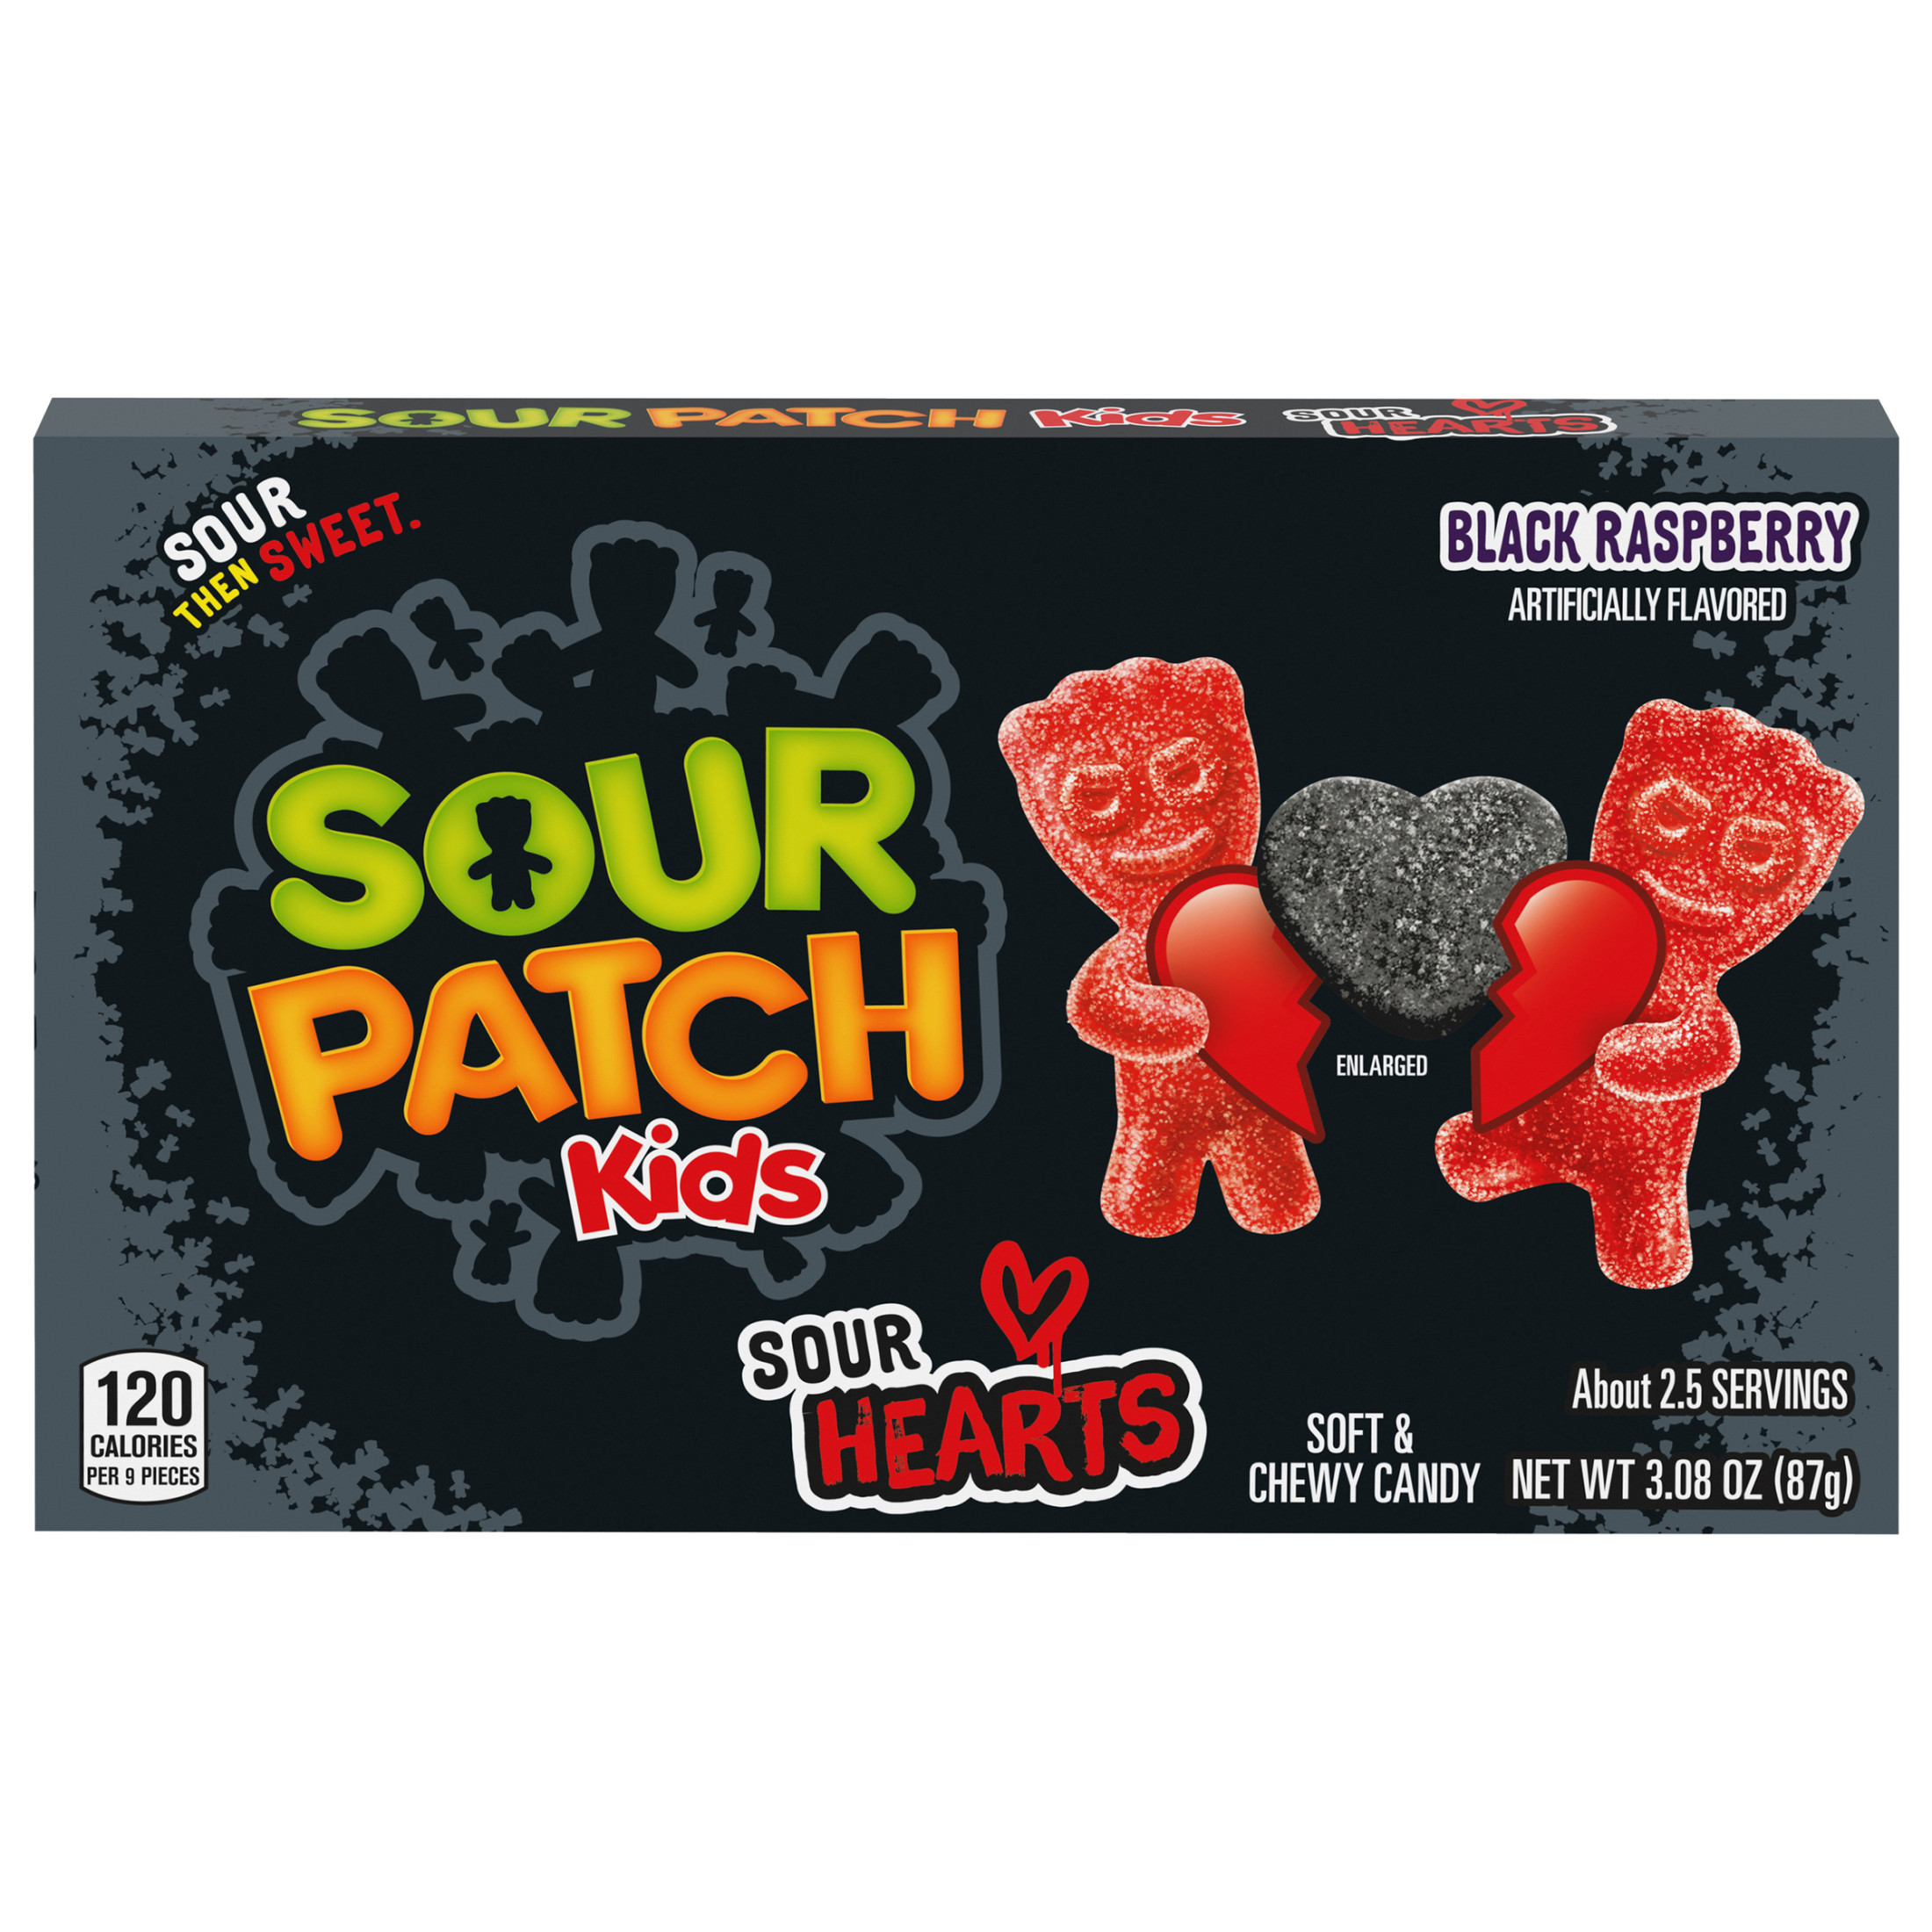 SOUR PATCH KIDS Sour Hearts Black Raspberry Soft & Chewy Candy, Valentines Candy, 3.08 oz - image 1 of 10